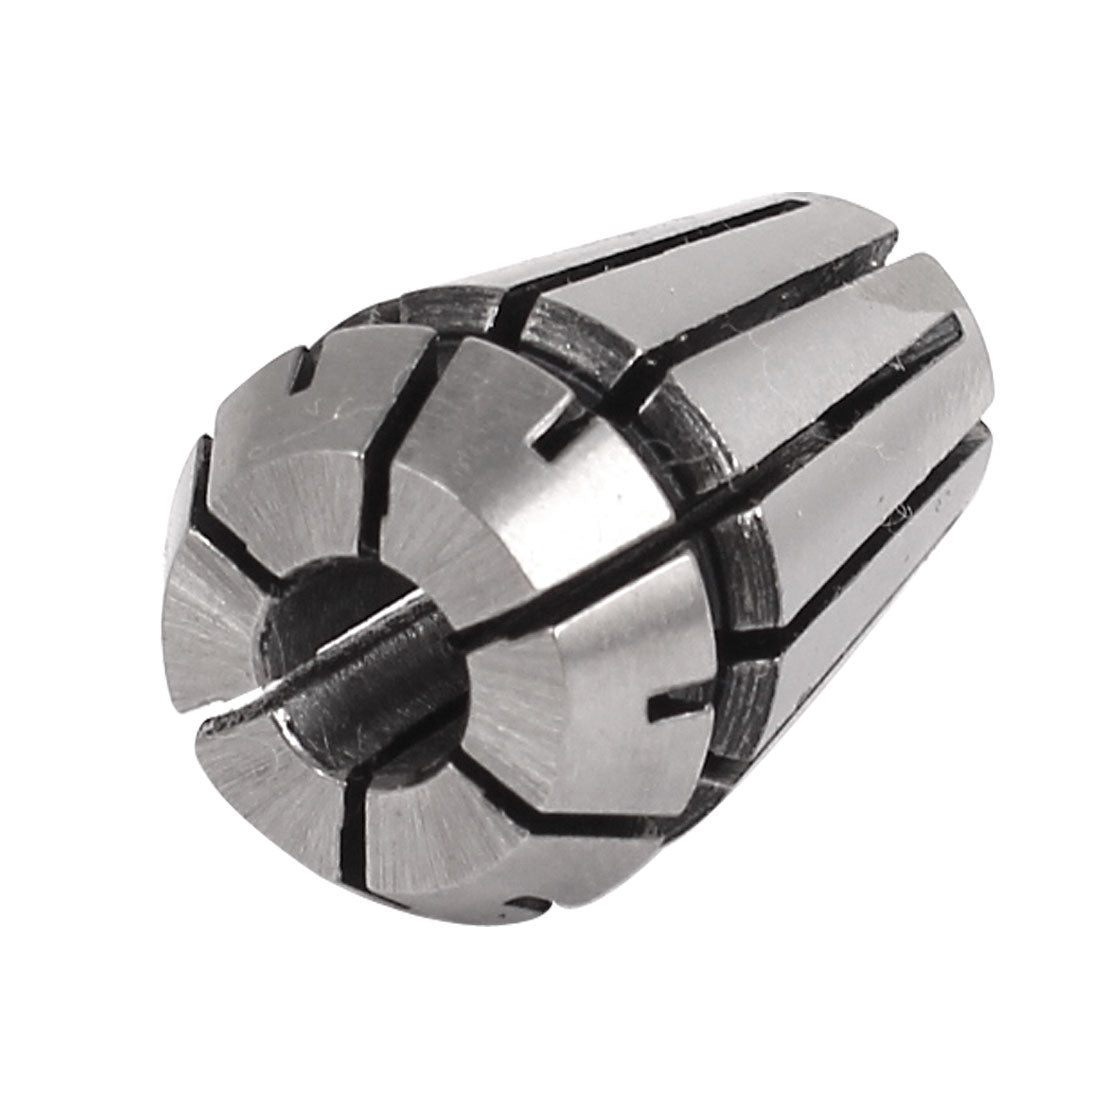 uxcell Uxcell ER16-6 5-6mm Clamping Range Spring Collet Chuck for CNC Milling Lathe Tool